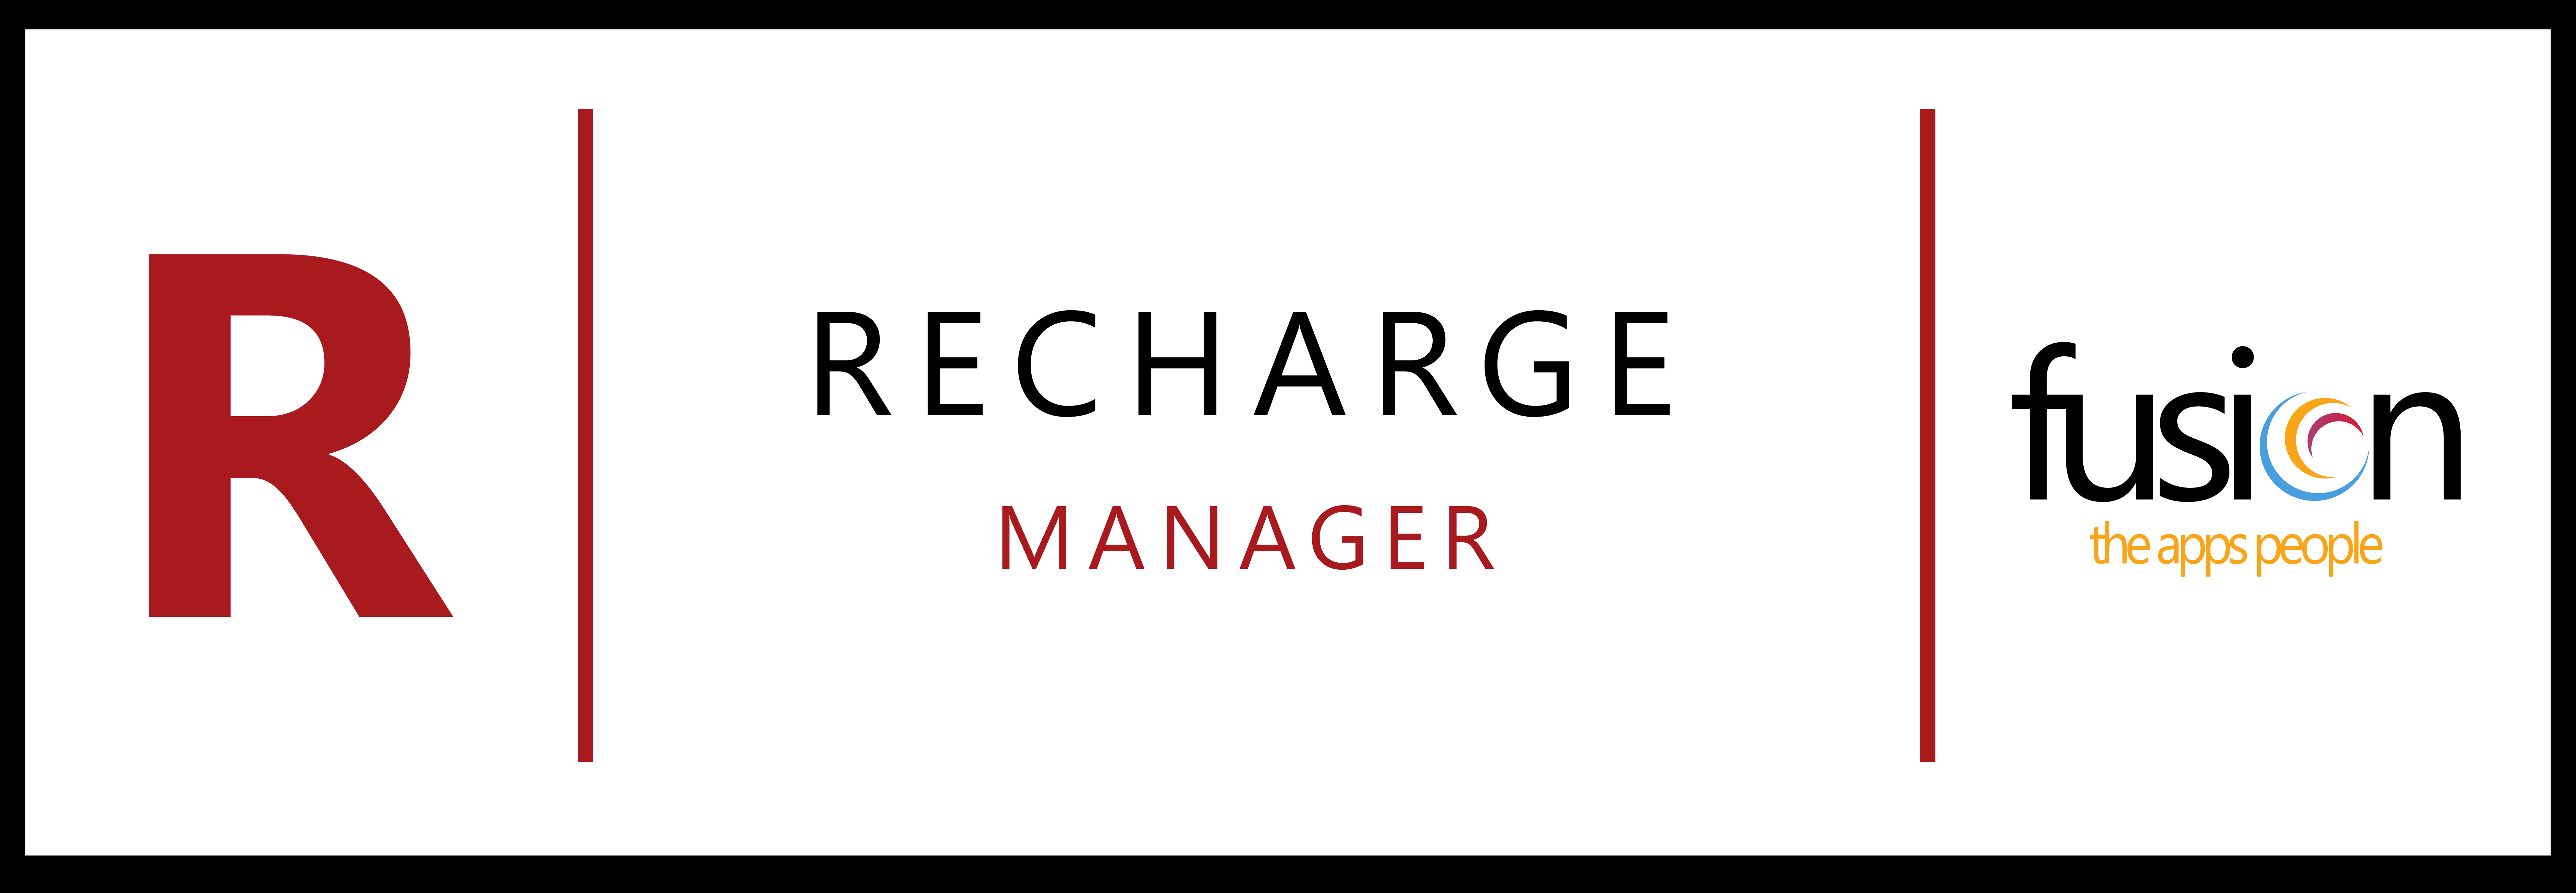 Recharge Manager